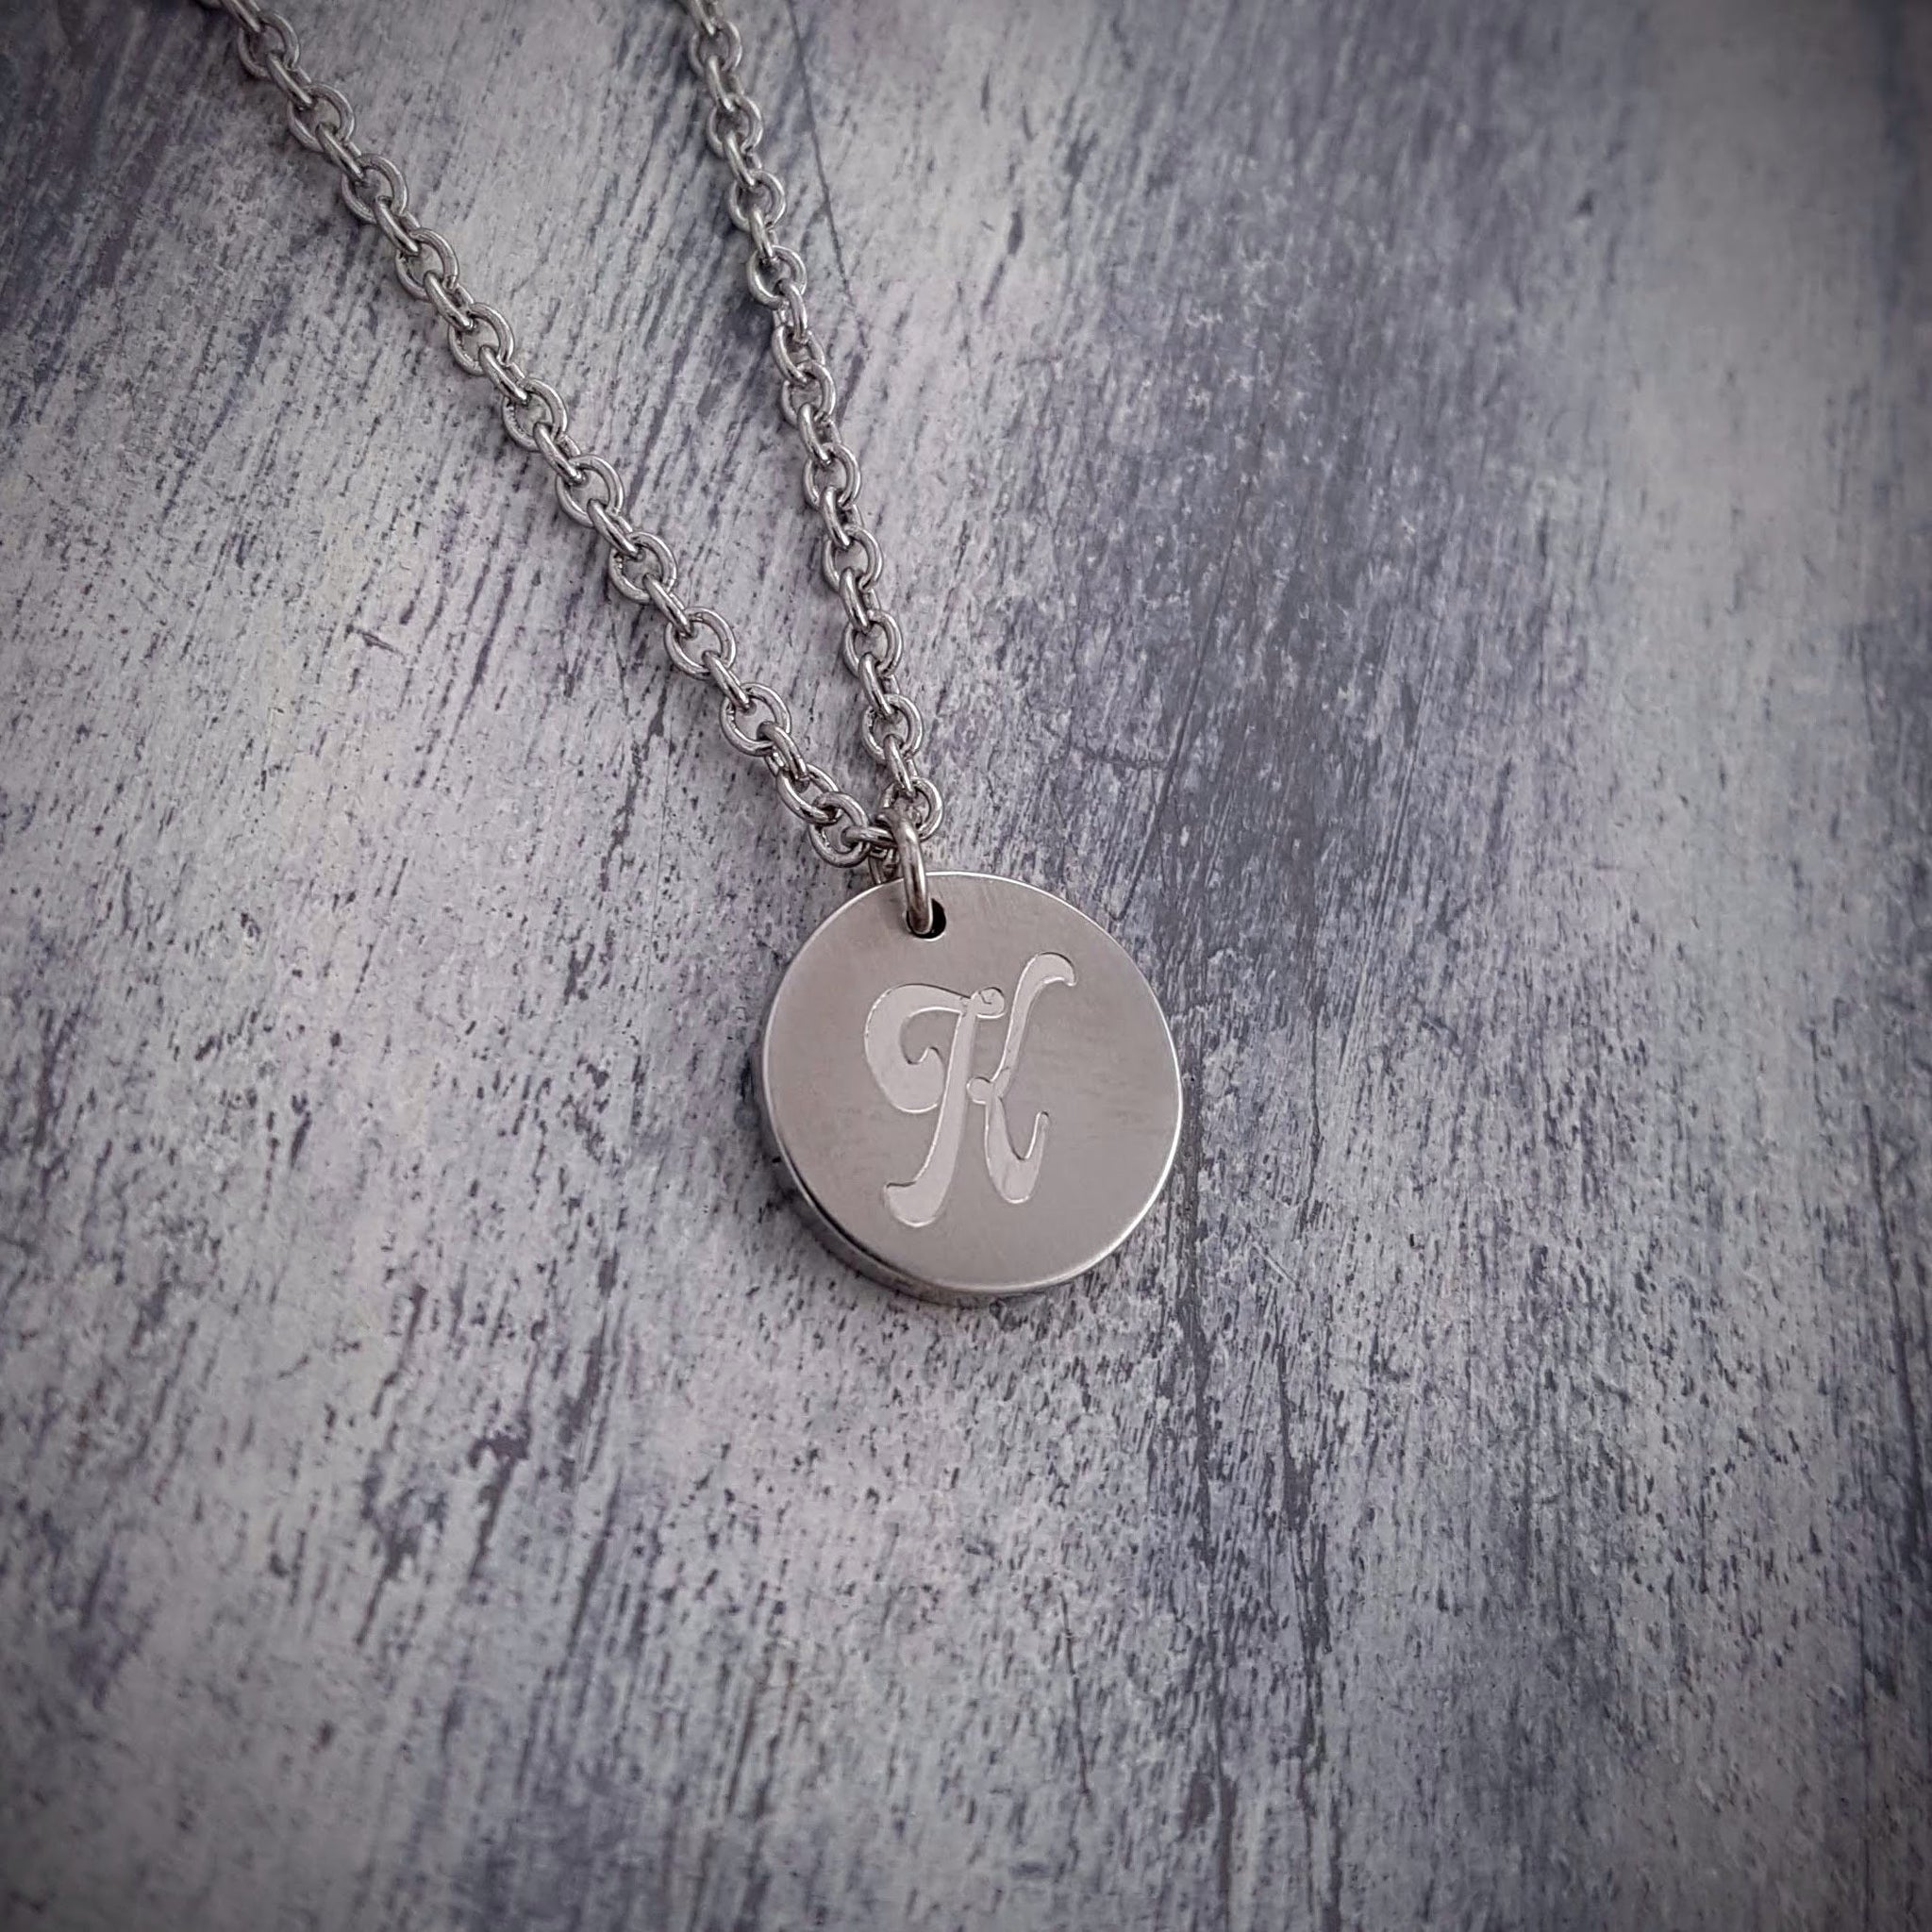 Engraved Initial Charm Necklace - Silver Monogram Pendant - Stainless Steel Personalized Symbol Necklace Silver Letter Necklace Gift for her - Gwen Delicious Jewelry Designs